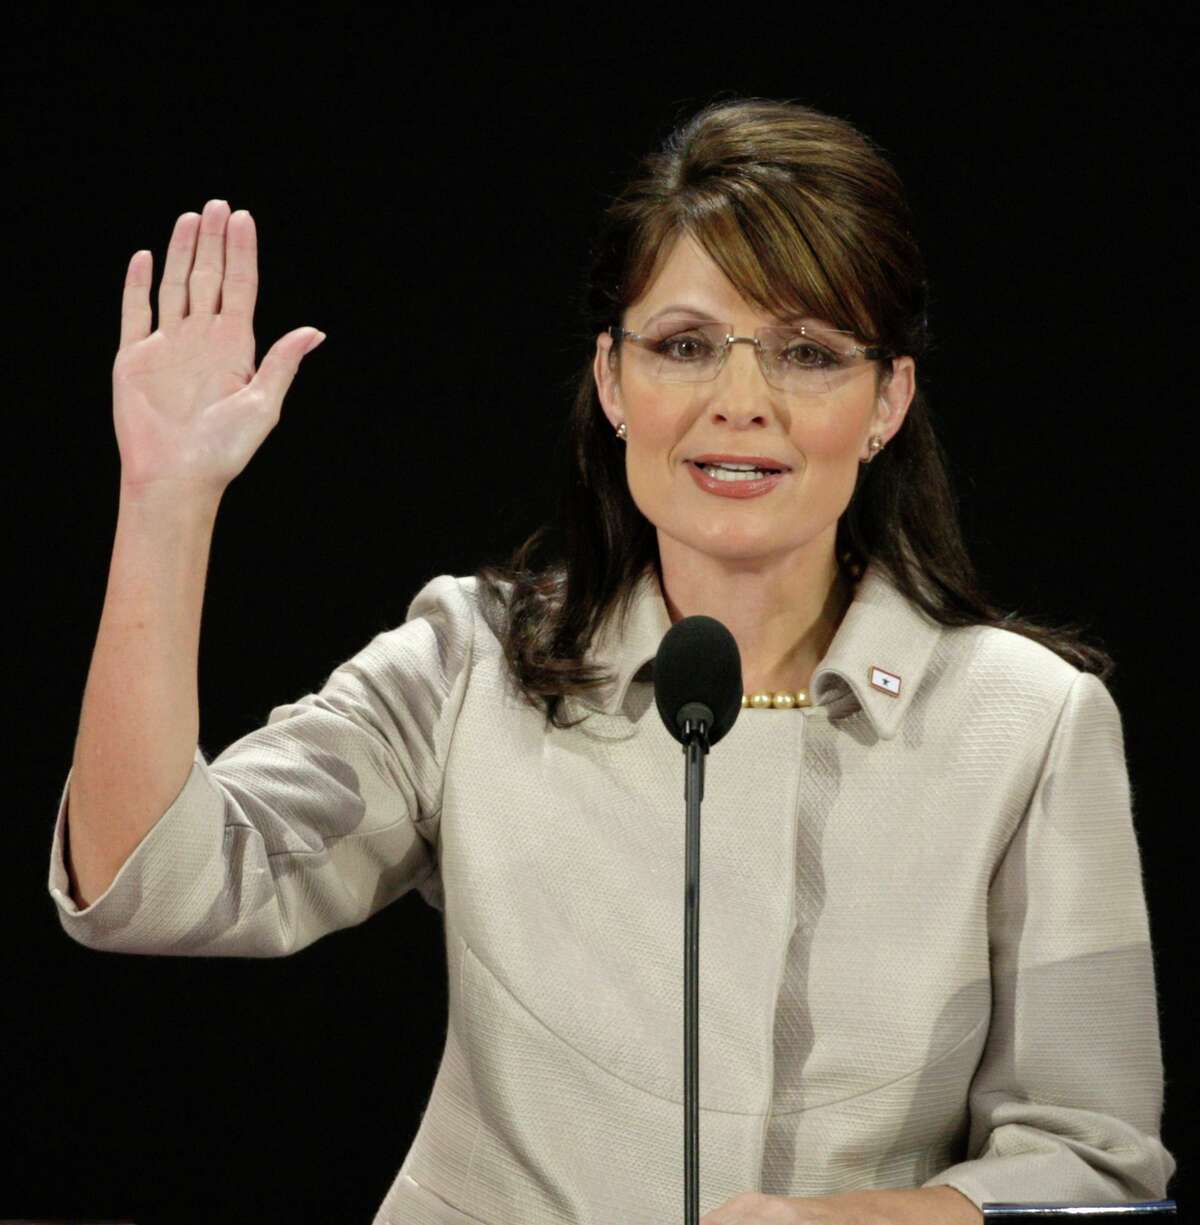 Republican Vice Presidential nominee Sarah Palin gestures during her speech at the 2008 Republican National Convention. Despite her ascent, women continue to be underrepresented at all levels of public office. Especially on the right.